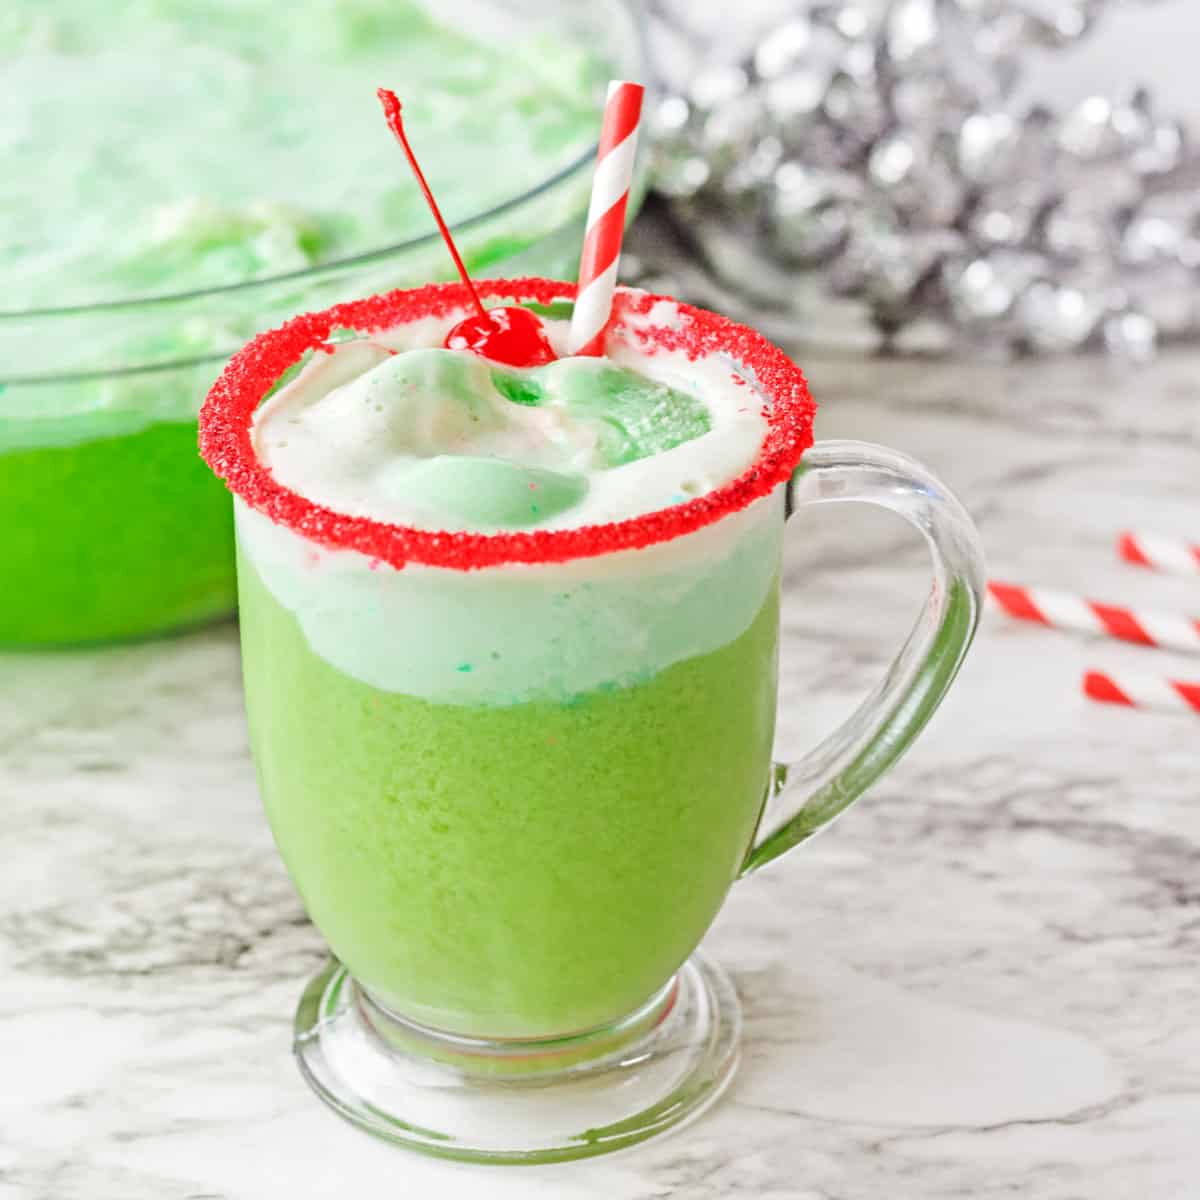 Grinch Punch in a clear glass with a red sugar rim garnished with a cherry.